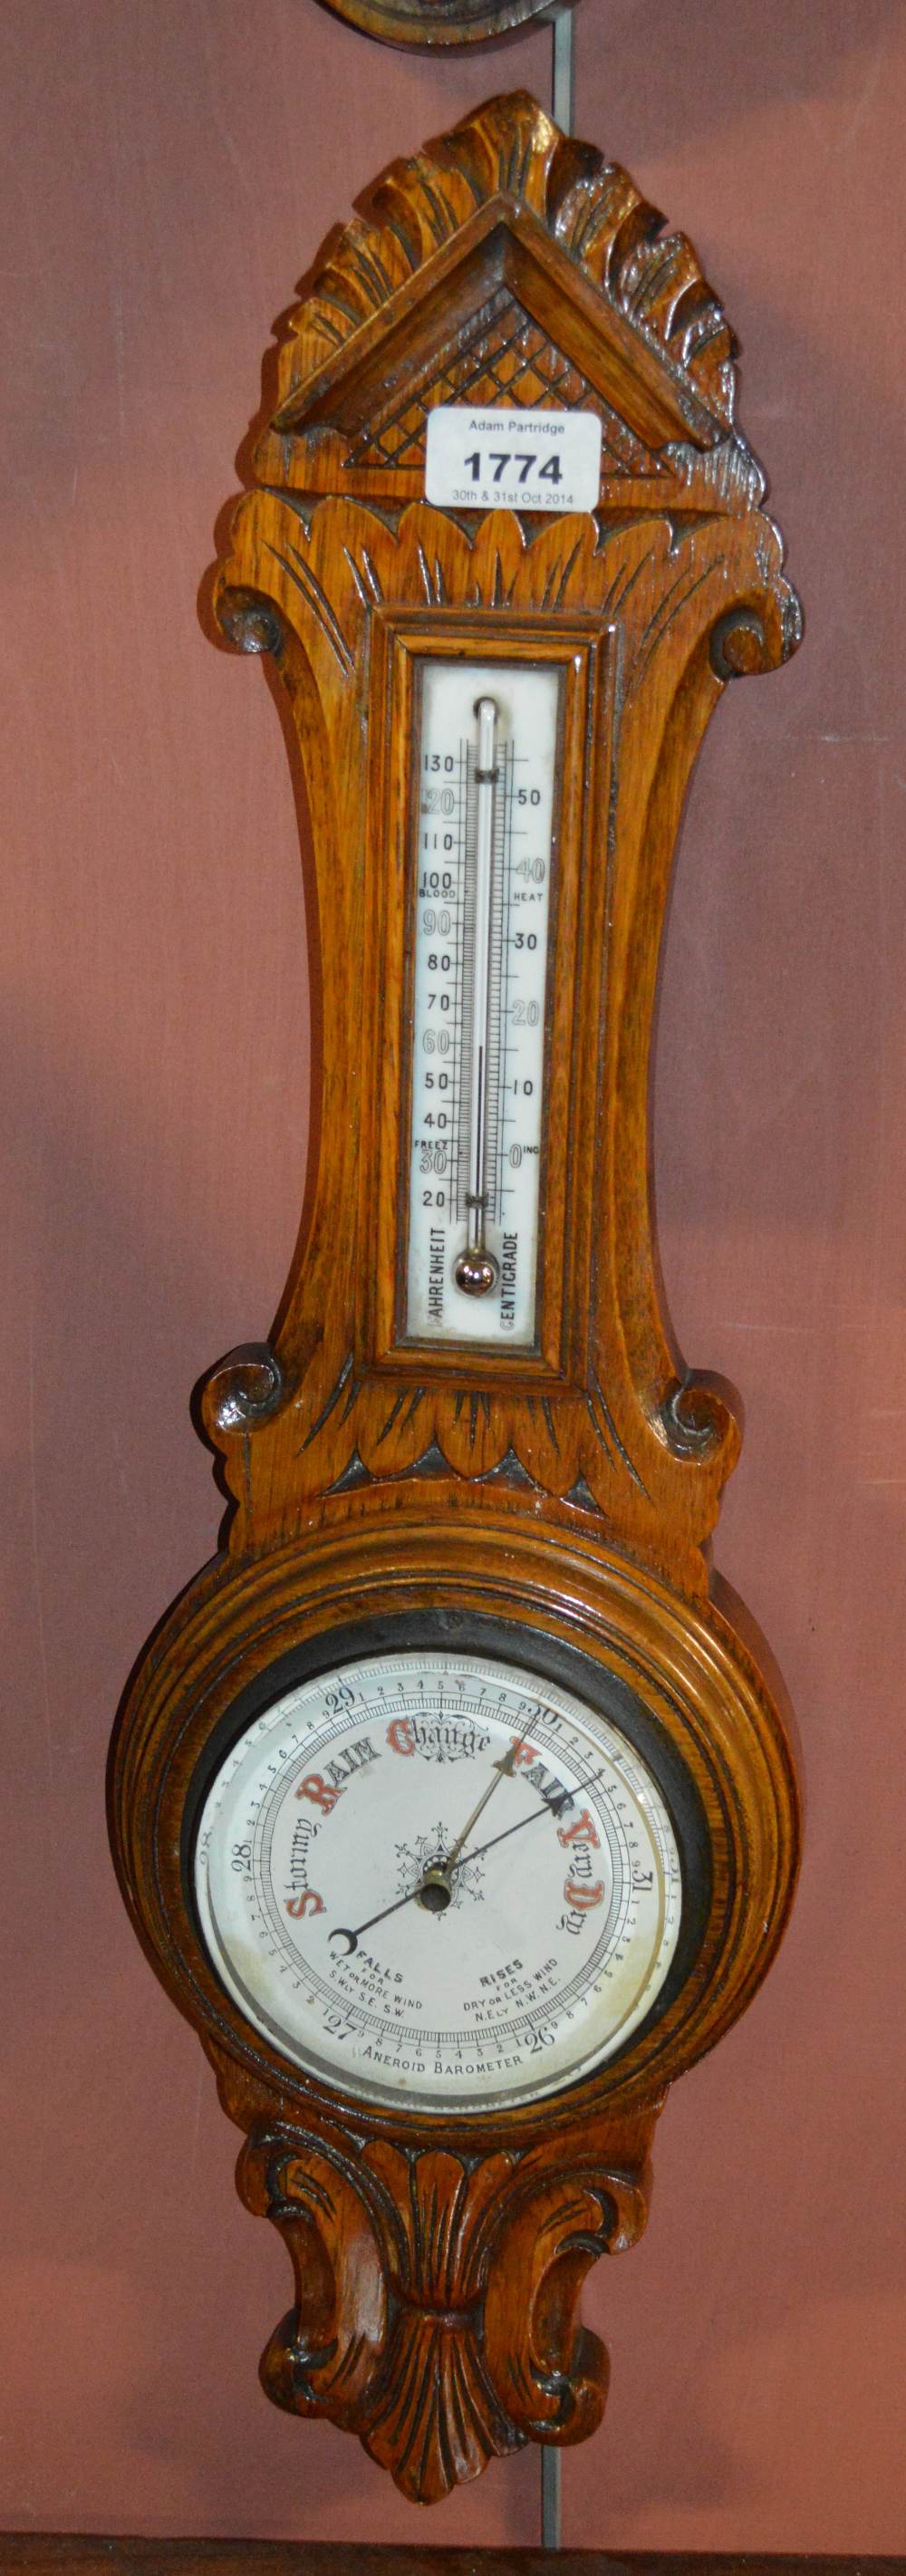 An early 20th century carved oak aneroid barometer.